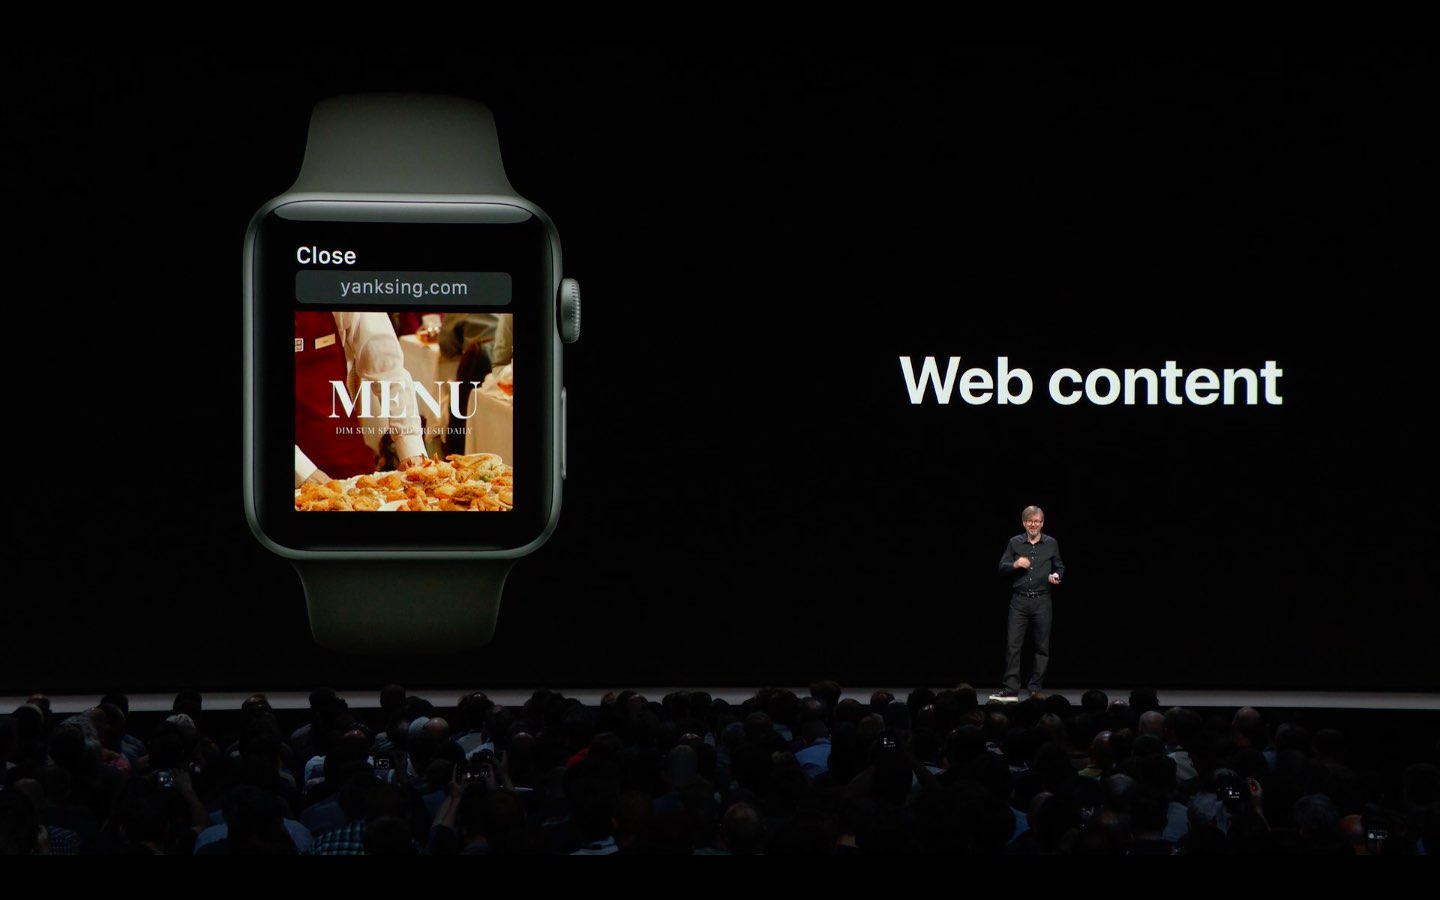 To view web content on Apple Watch, email yourself a link to the website you'd like to view via Mail or iMessage